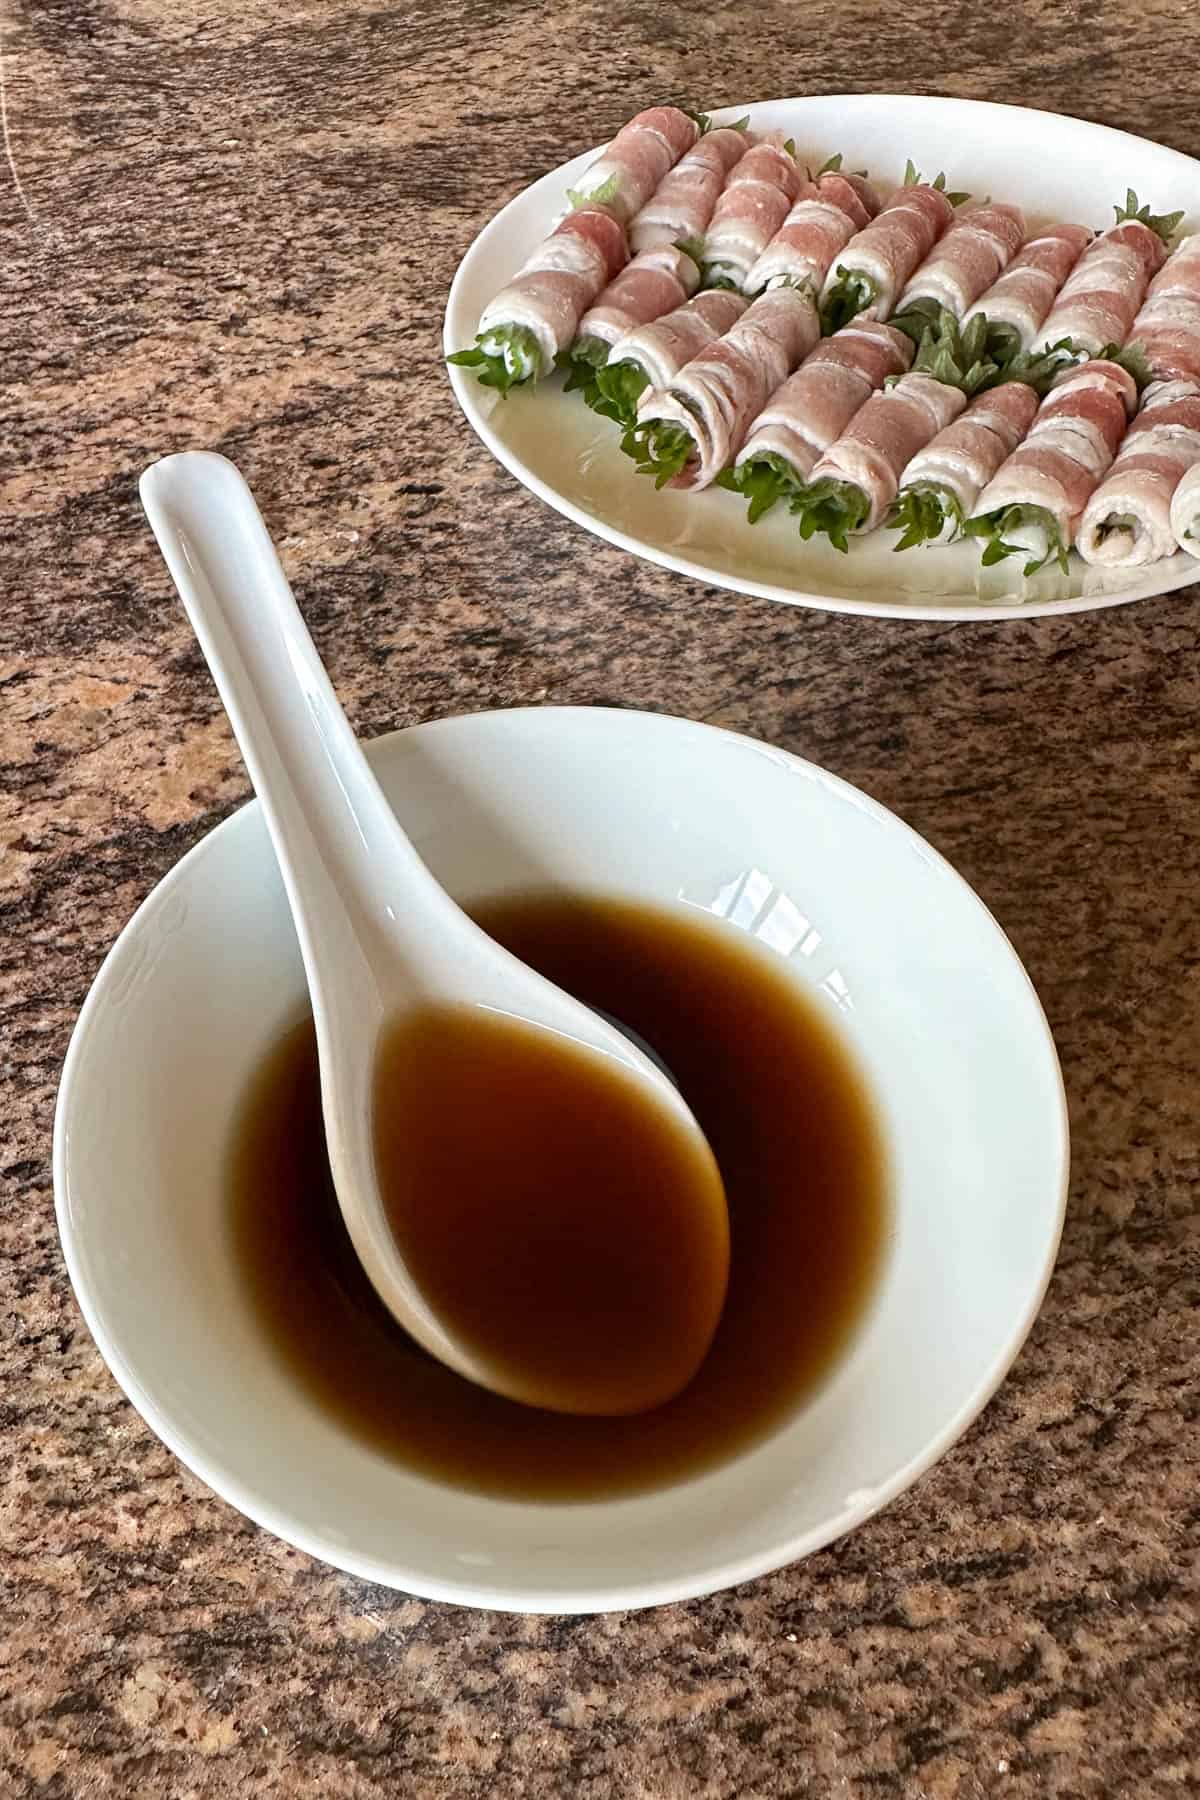 A sauce made of soy sauce, mirin, and sake, in a bowl.